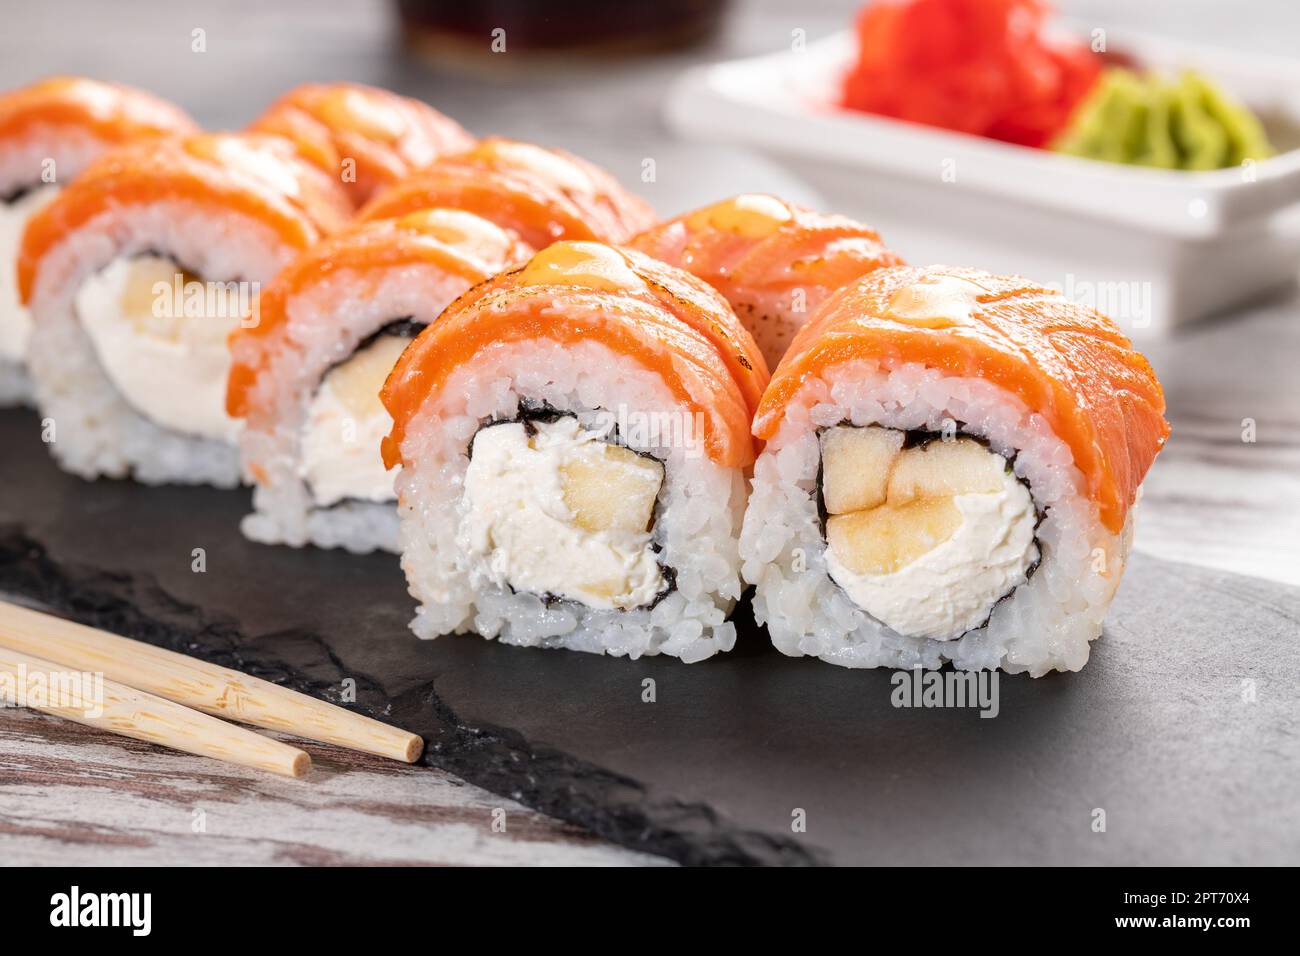 https://c8.alamy.com/comp/2PT70X4/popular-food-set-of-philadelphia-sushi-on-black-concrete-plate-on-table-close-up-of-pieces-of-sushi-rolls-with-salmon-on-top-and-with-cheese-and-eel-2PT70X4.jpg